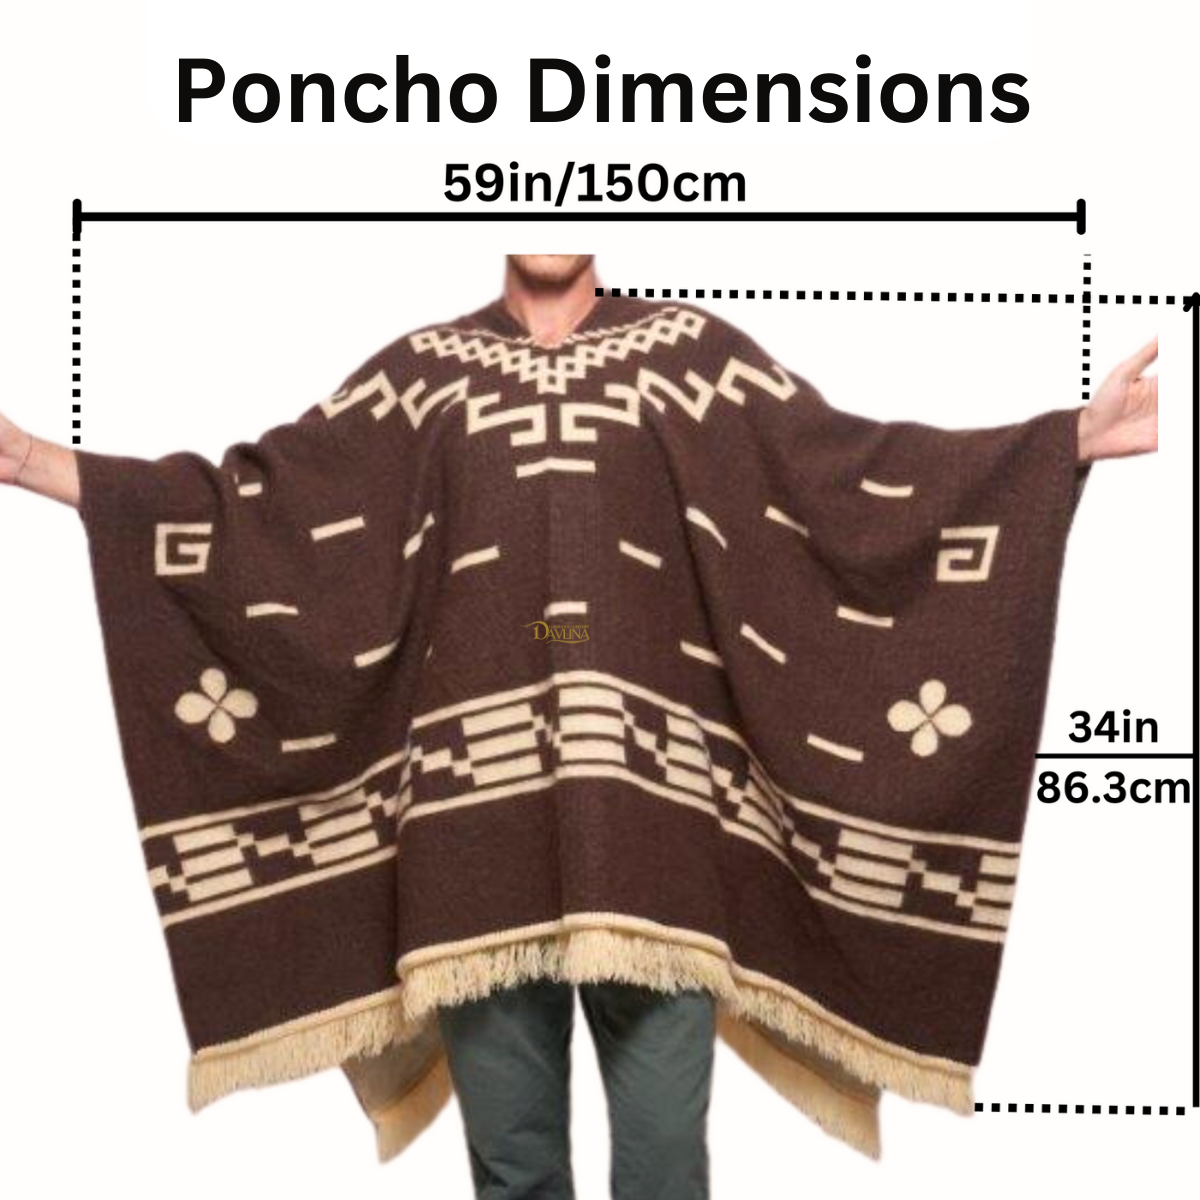 Clint Eastwood Poncho Lightweight Replica ,brown, Wool Blend, Handwoven in  South America, Cape, Coat, Jacket, Fair Trade, Perfect Gift 